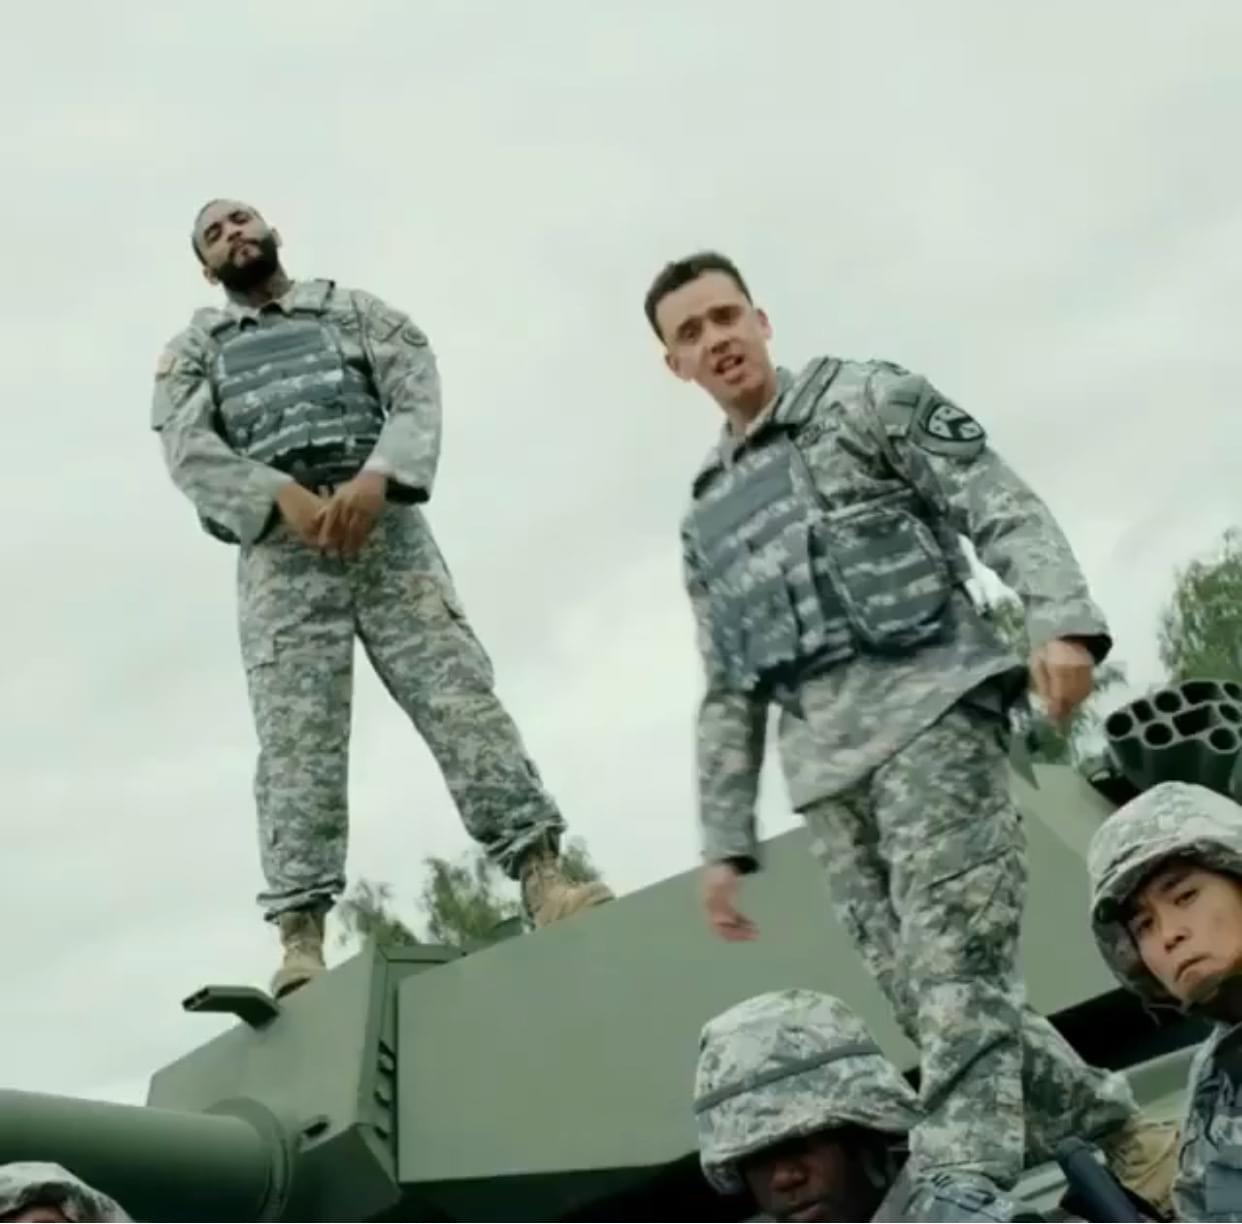 Logic And Joyner Have Squashed Their Beef And Linked Up For “ISIS” Visuals